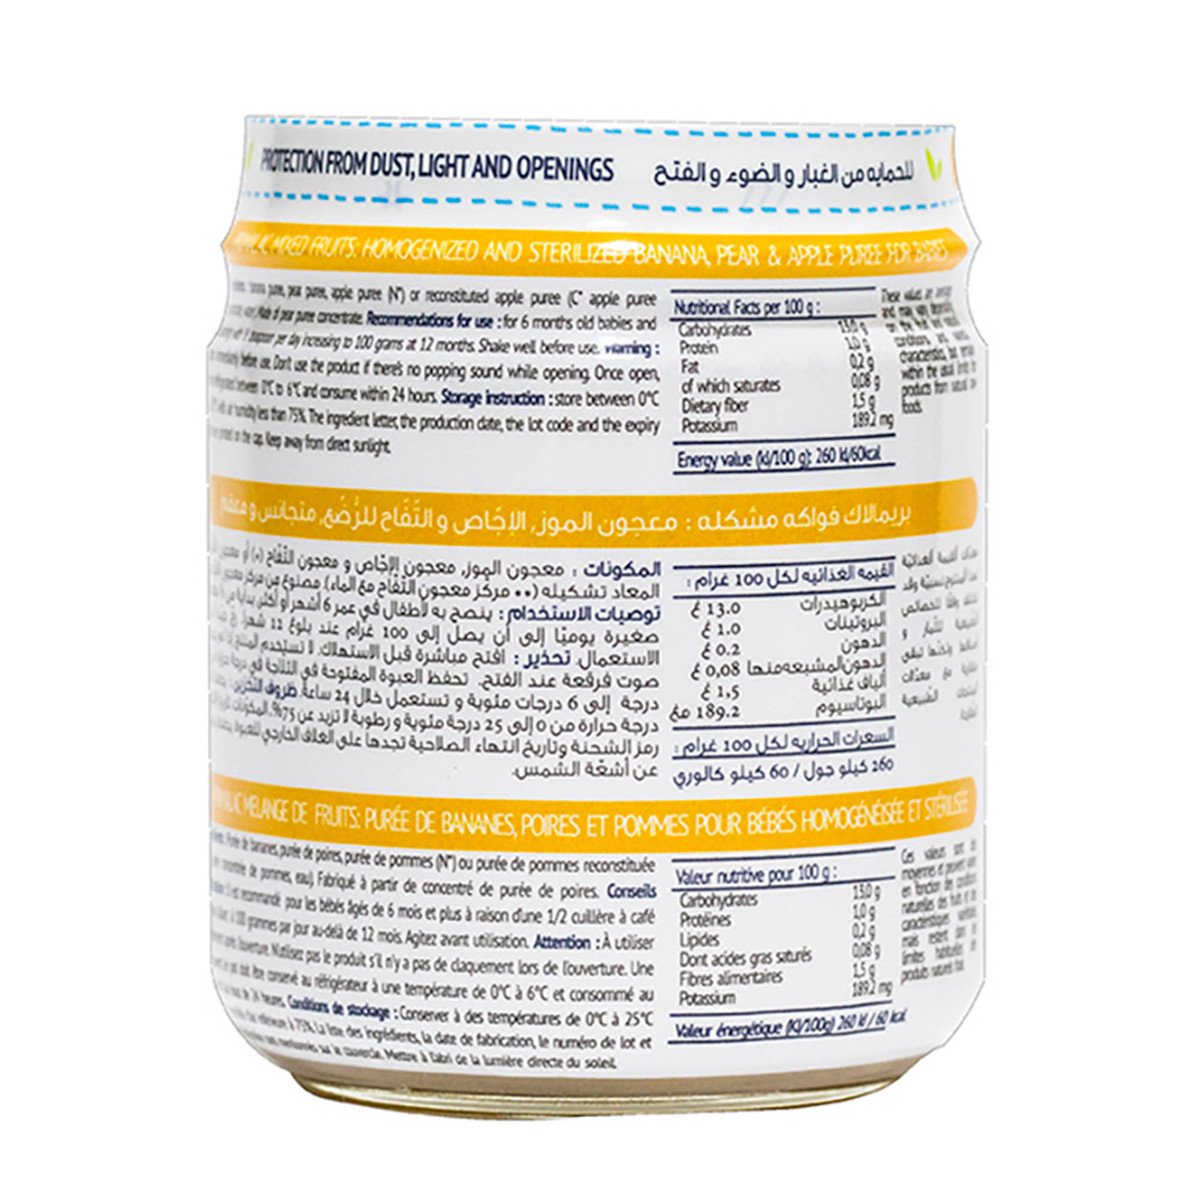 Primalac Baby Food Mixed Fruits Jar 6+months 90g